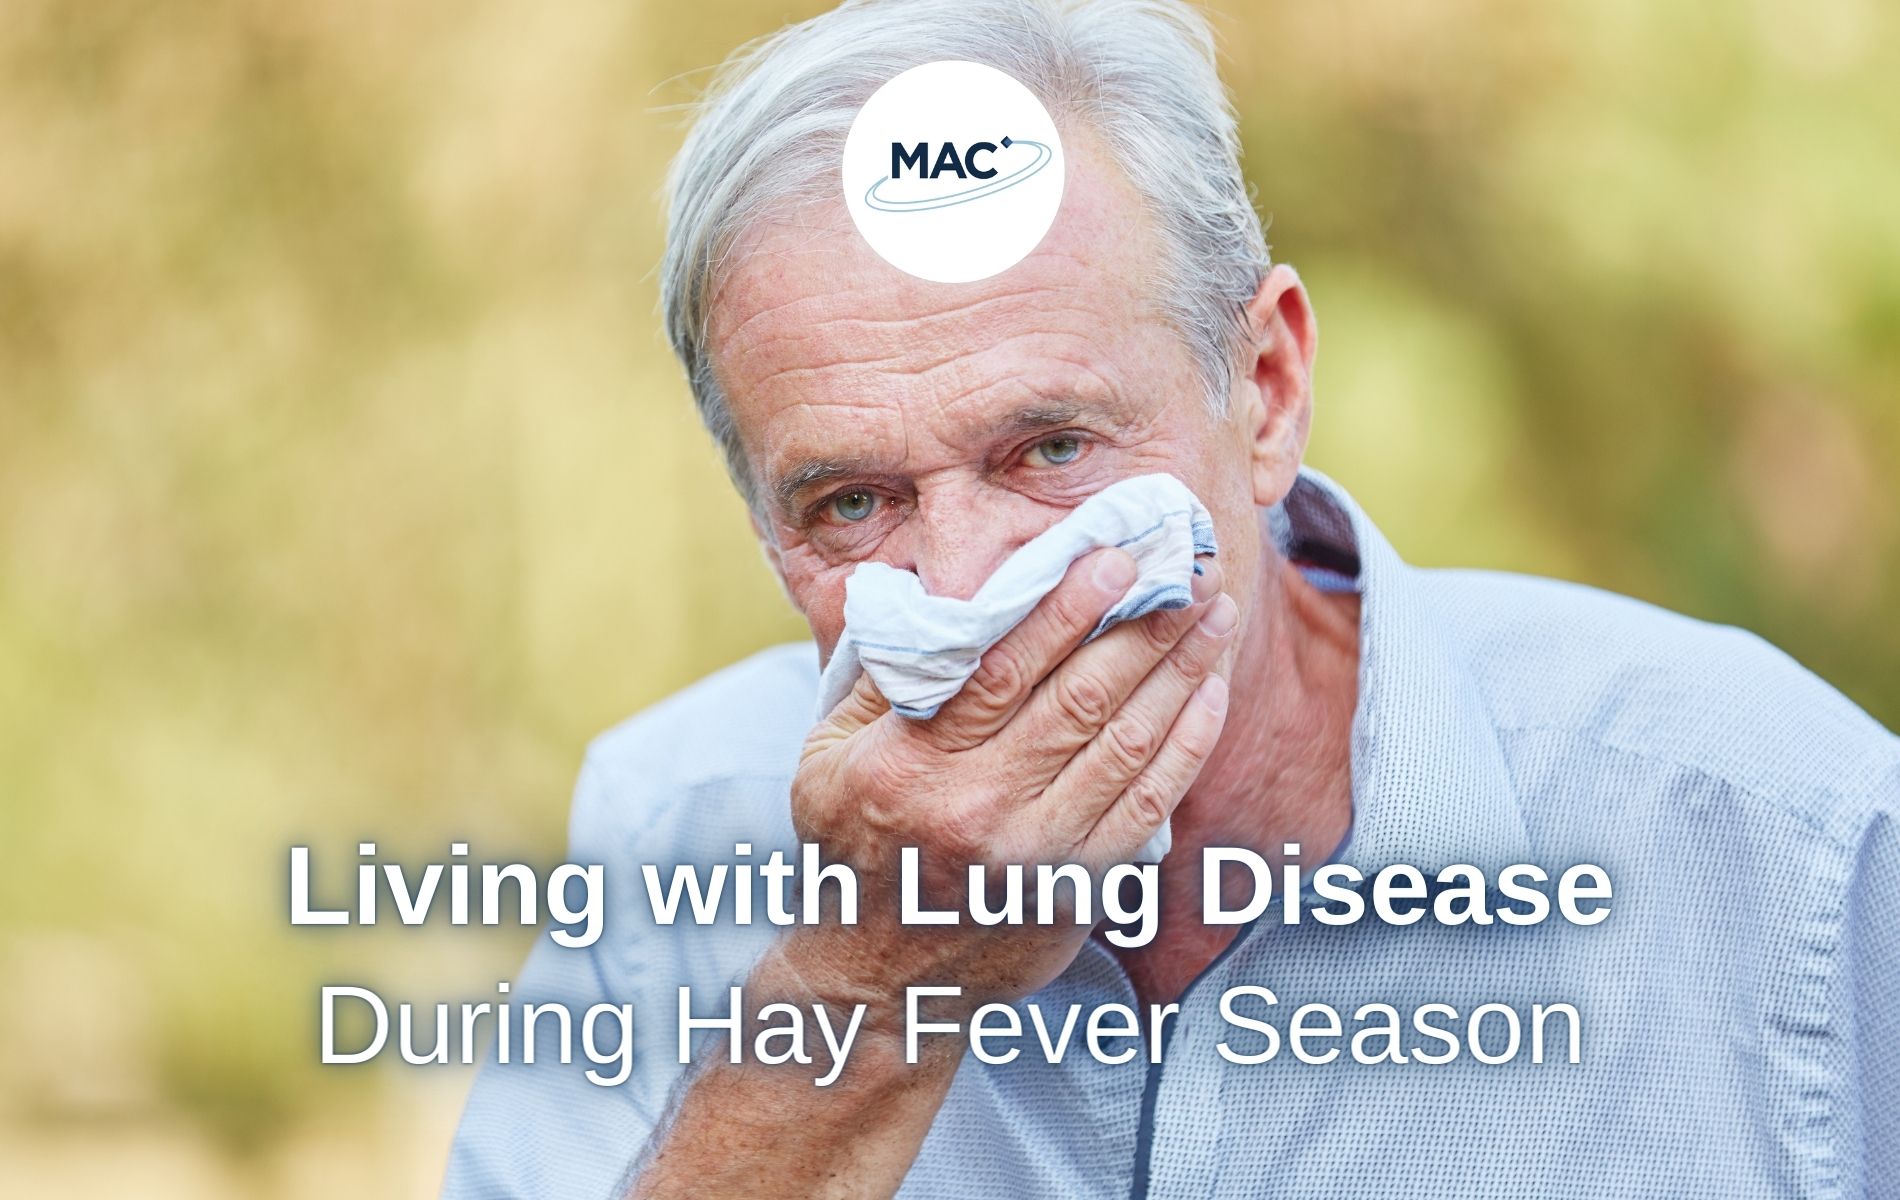 Living with lung disease during hay fever season